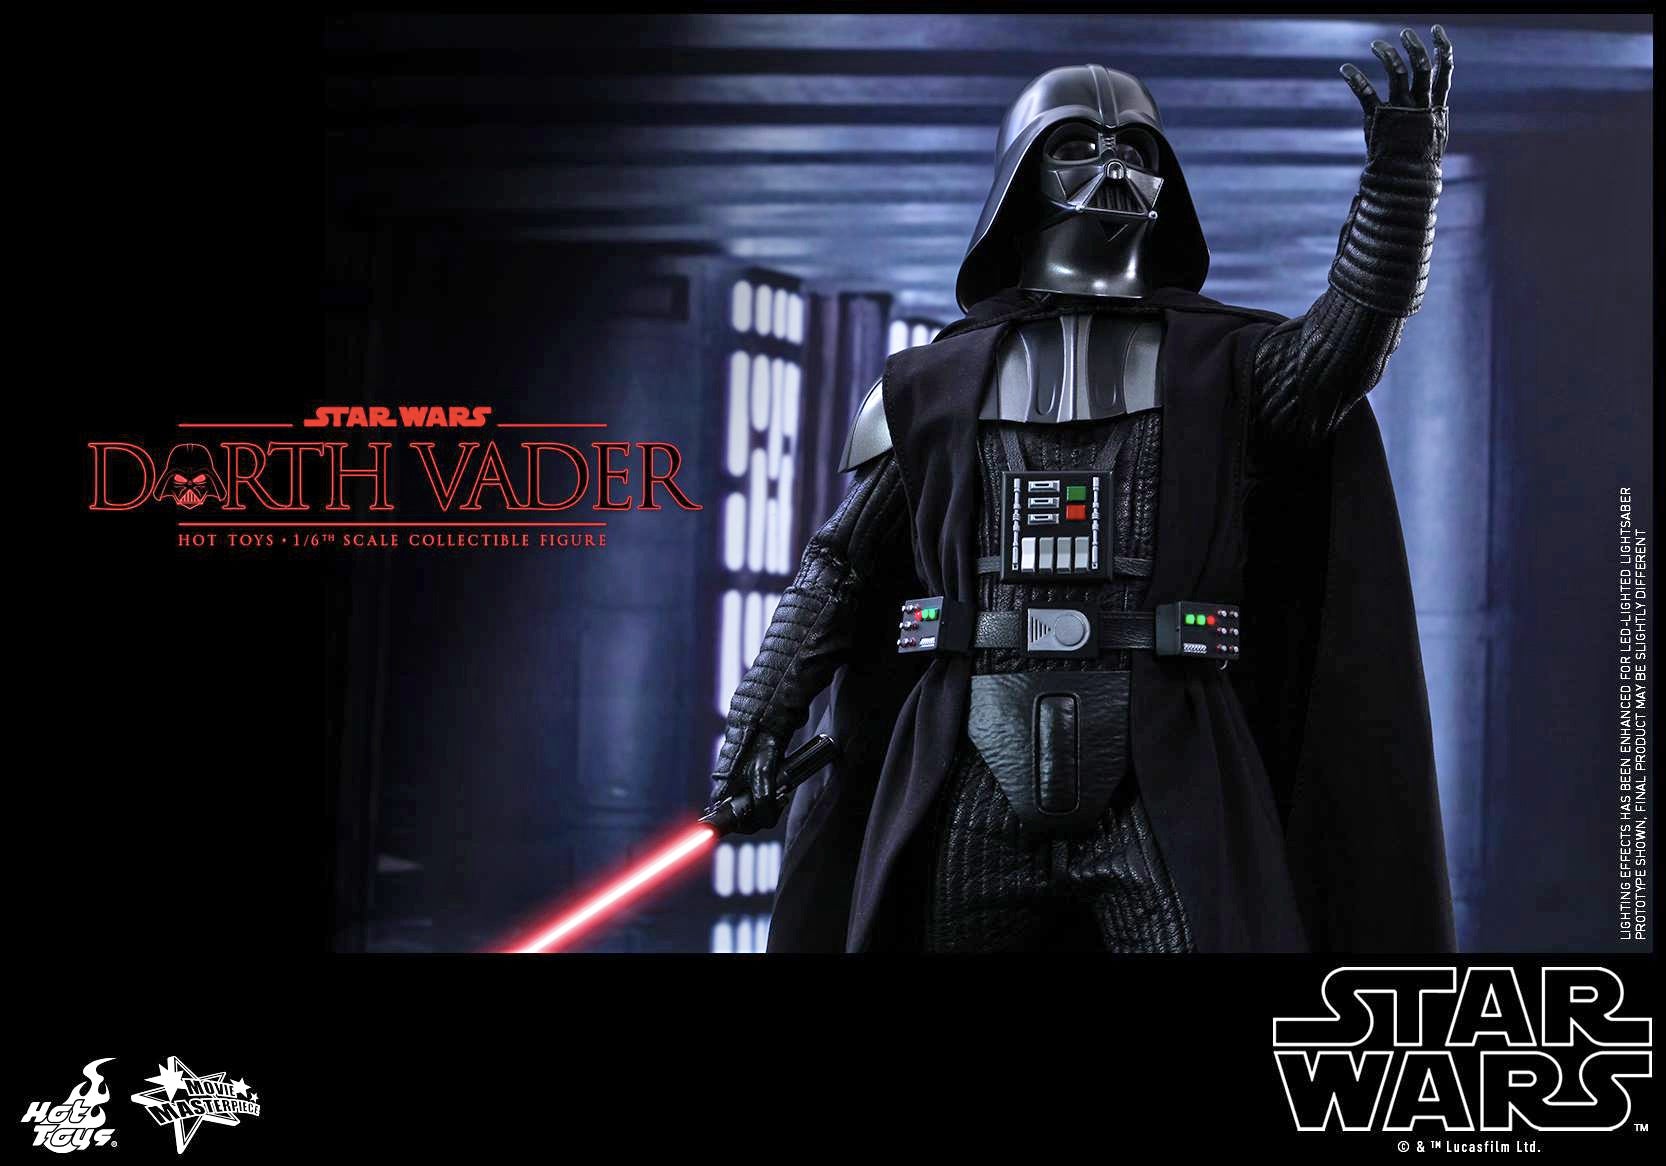 The Definitive Darth Vader Figure Even Has His Iconic Breathing Sounds